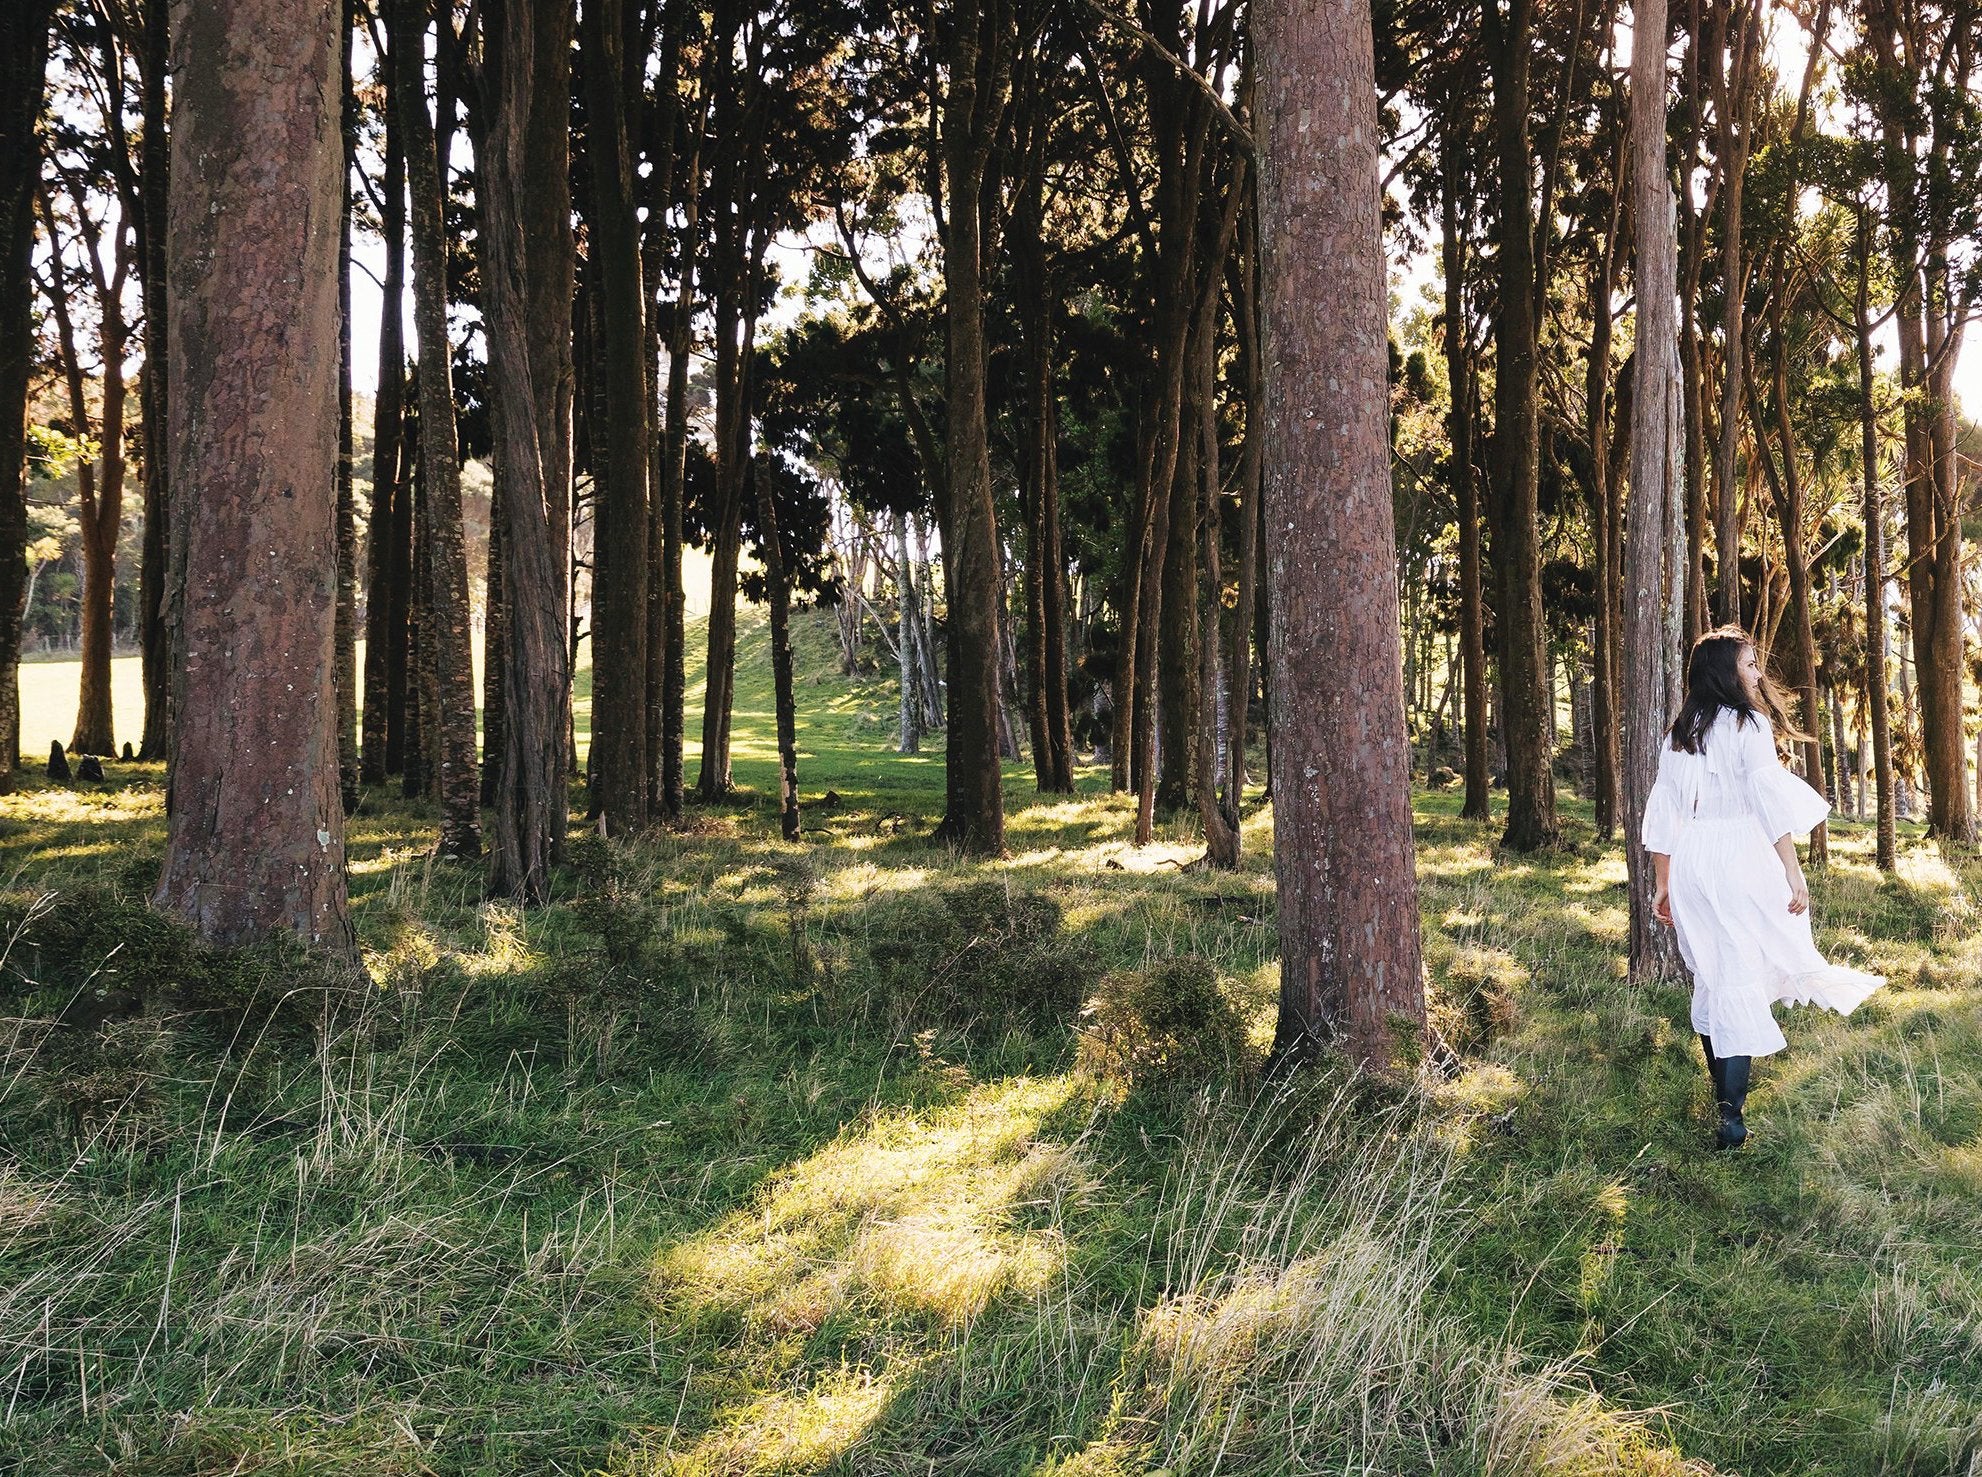 Woman in white dress walking in calm forest